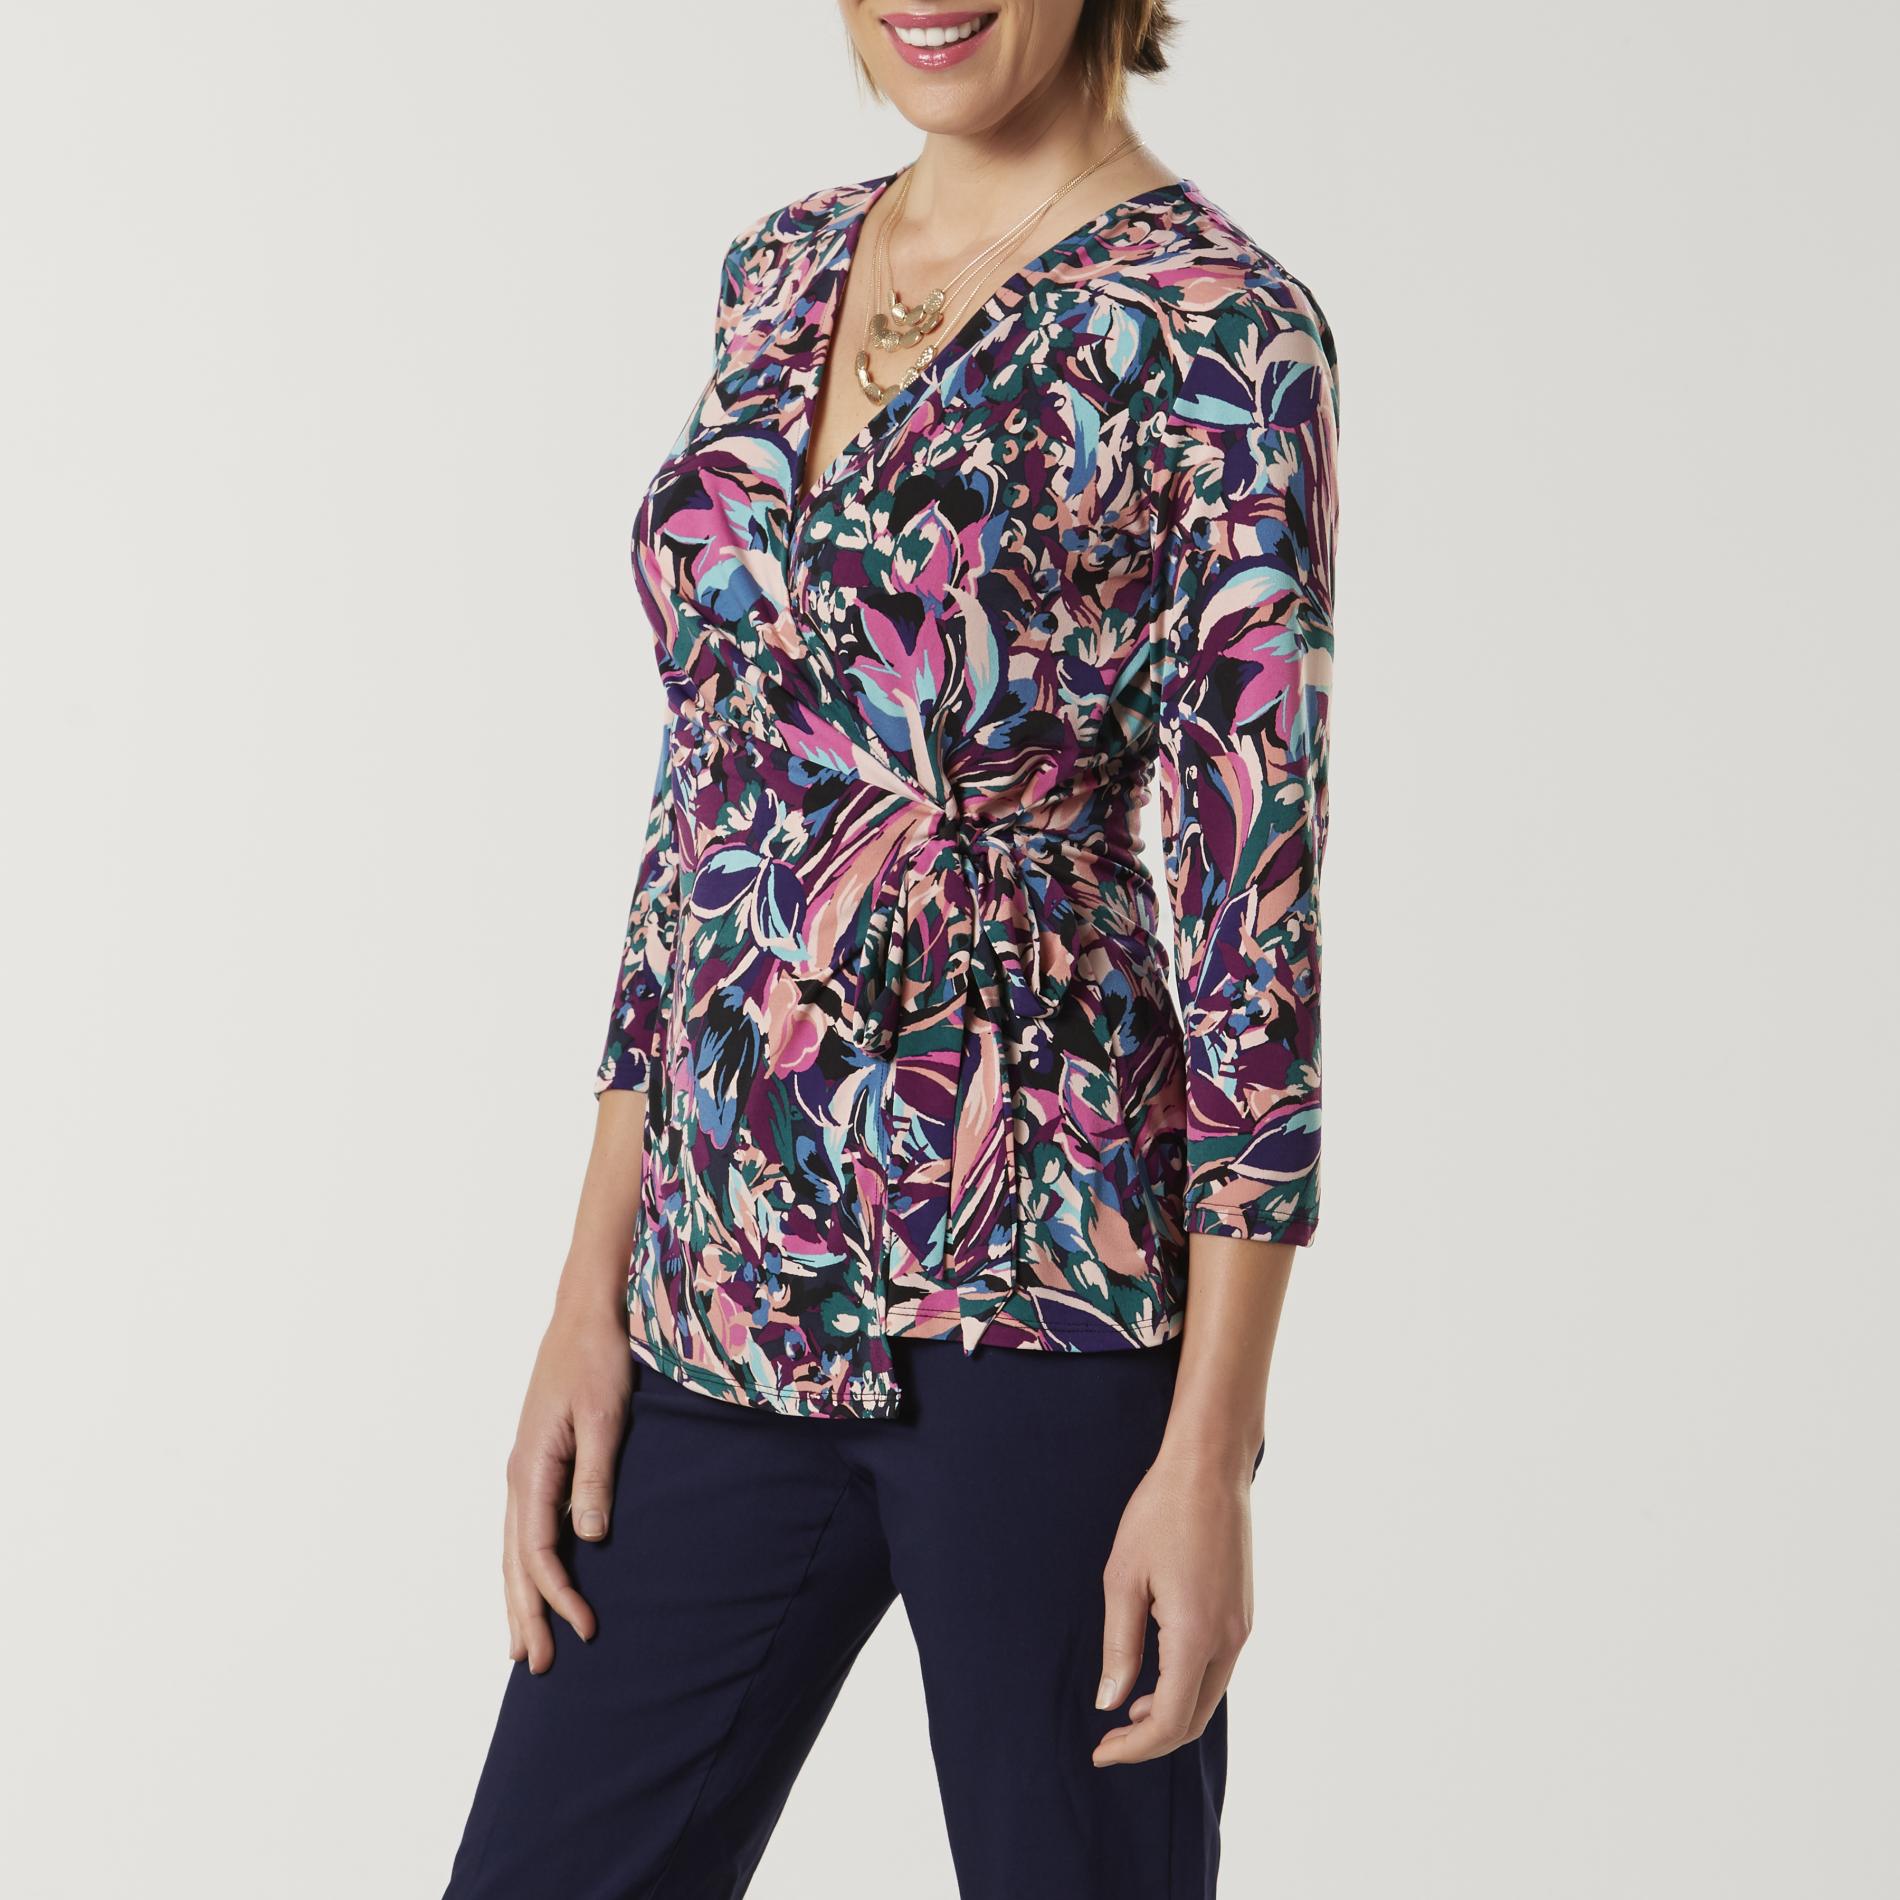 Jaclyn Smith Women's Wrap Top - Floral